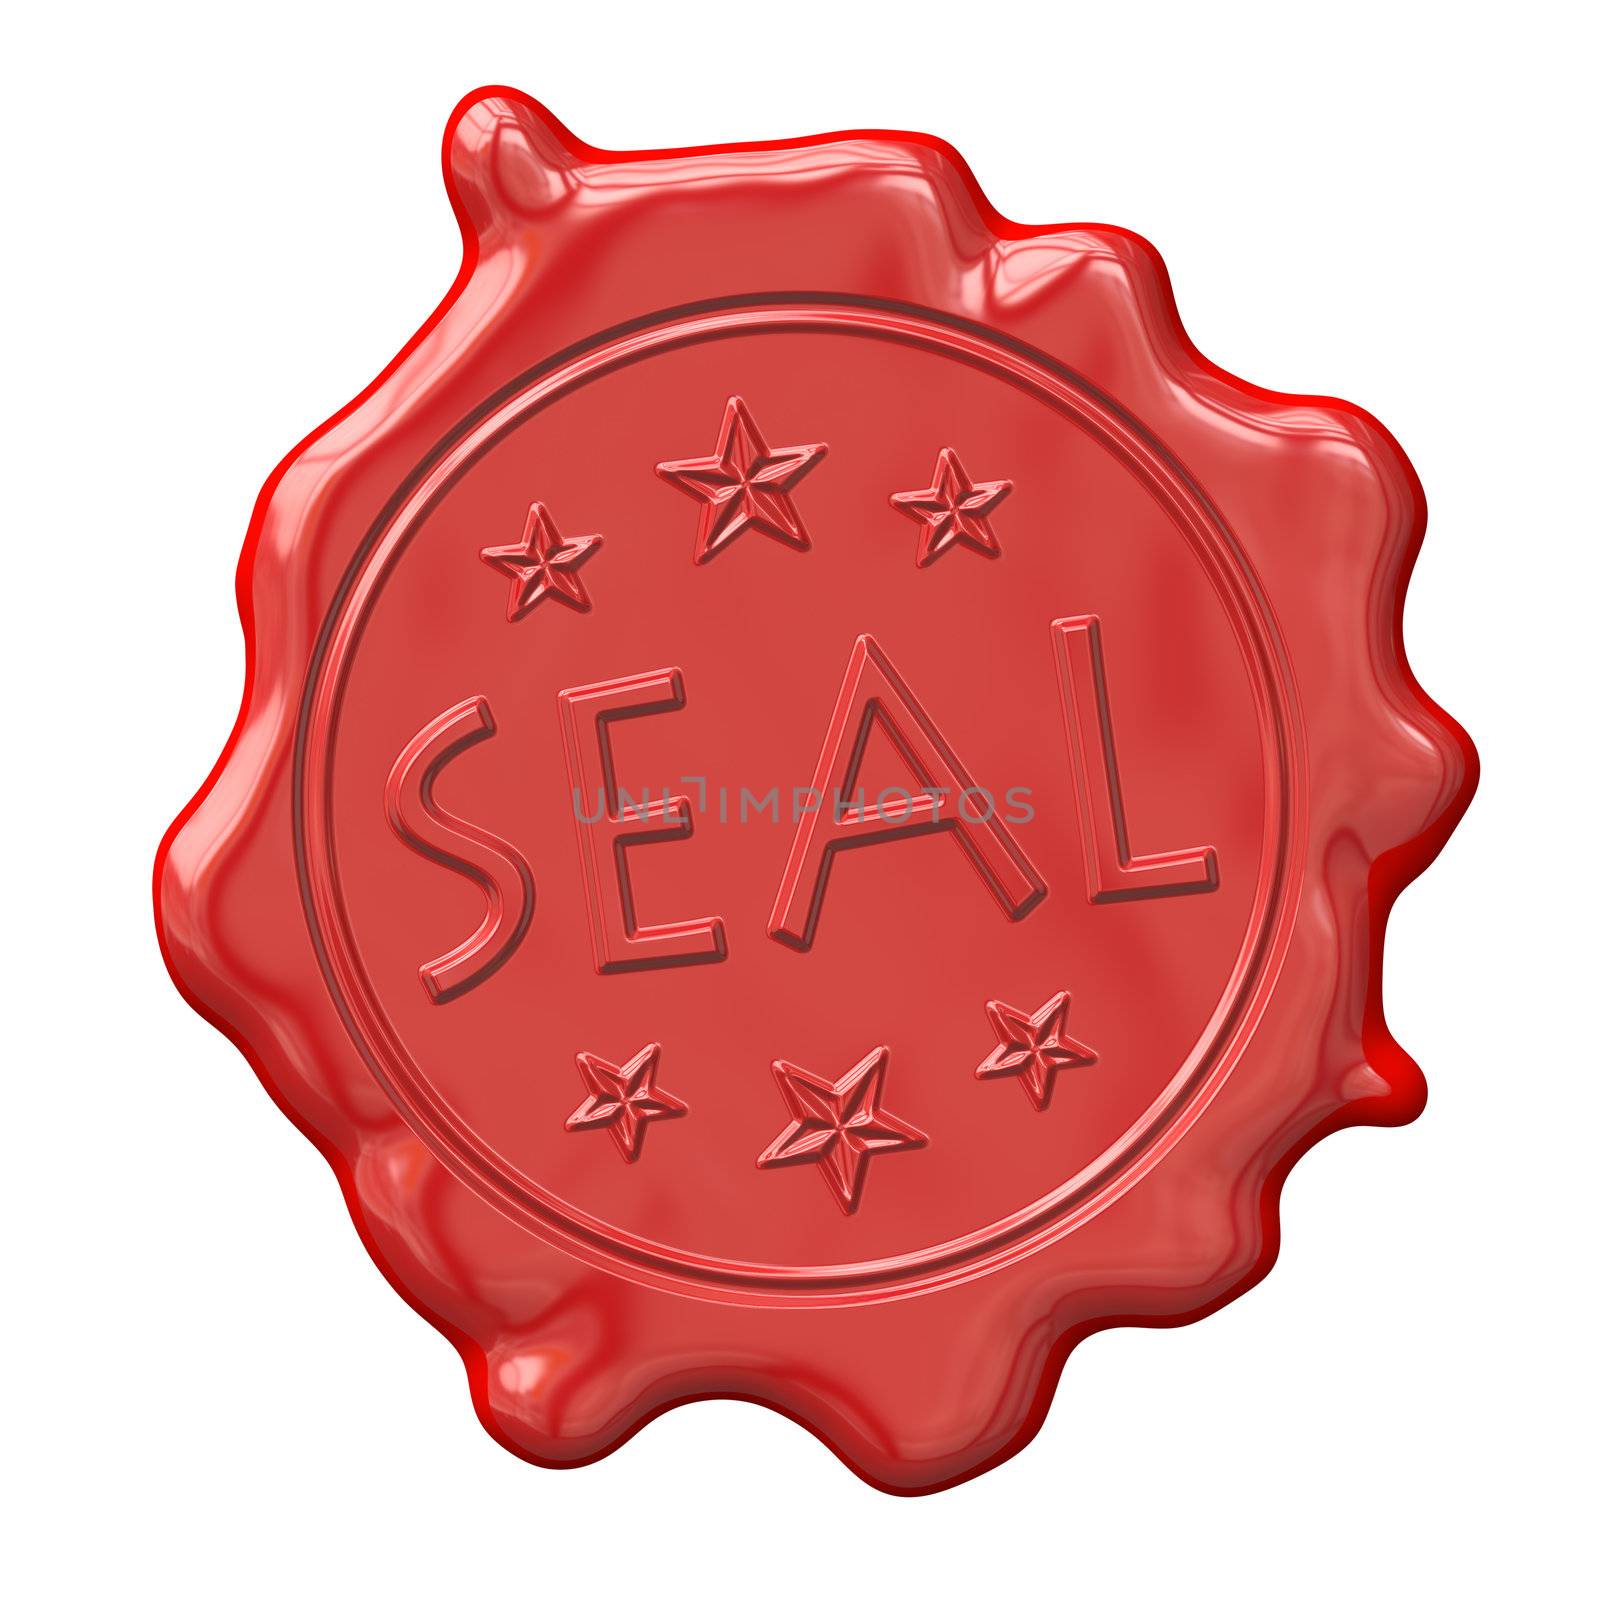 An image of a red seal of wax